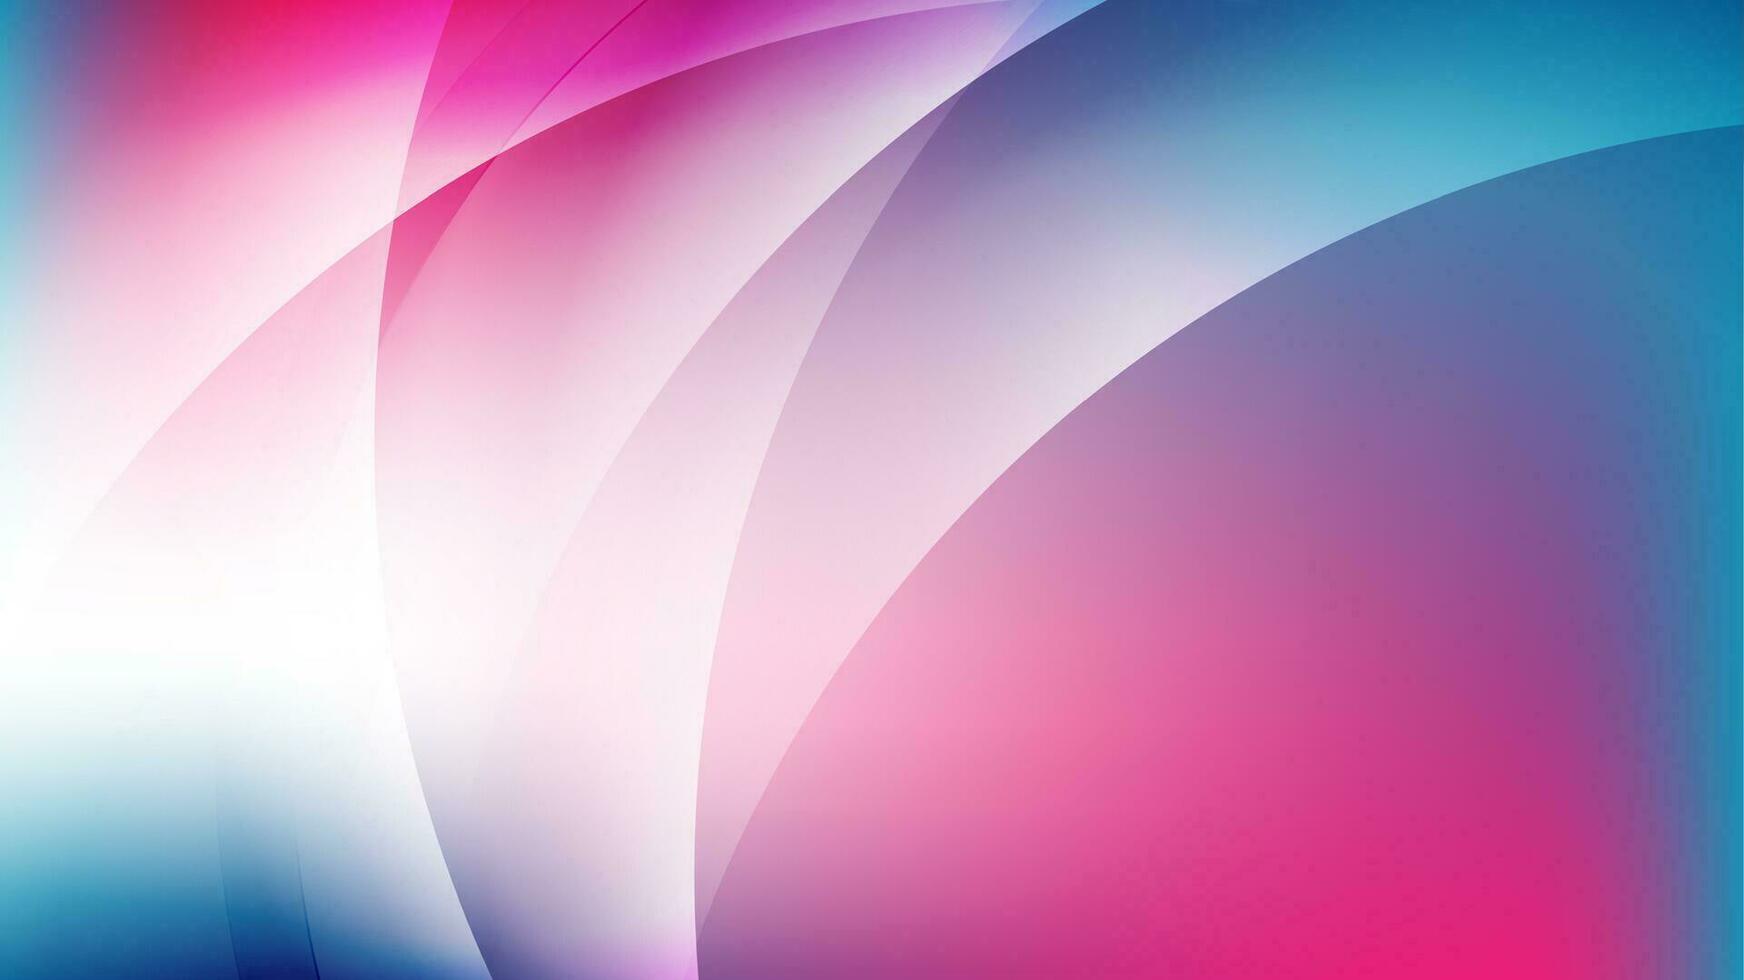 Blue pink glossy shiny waves abstract background vector